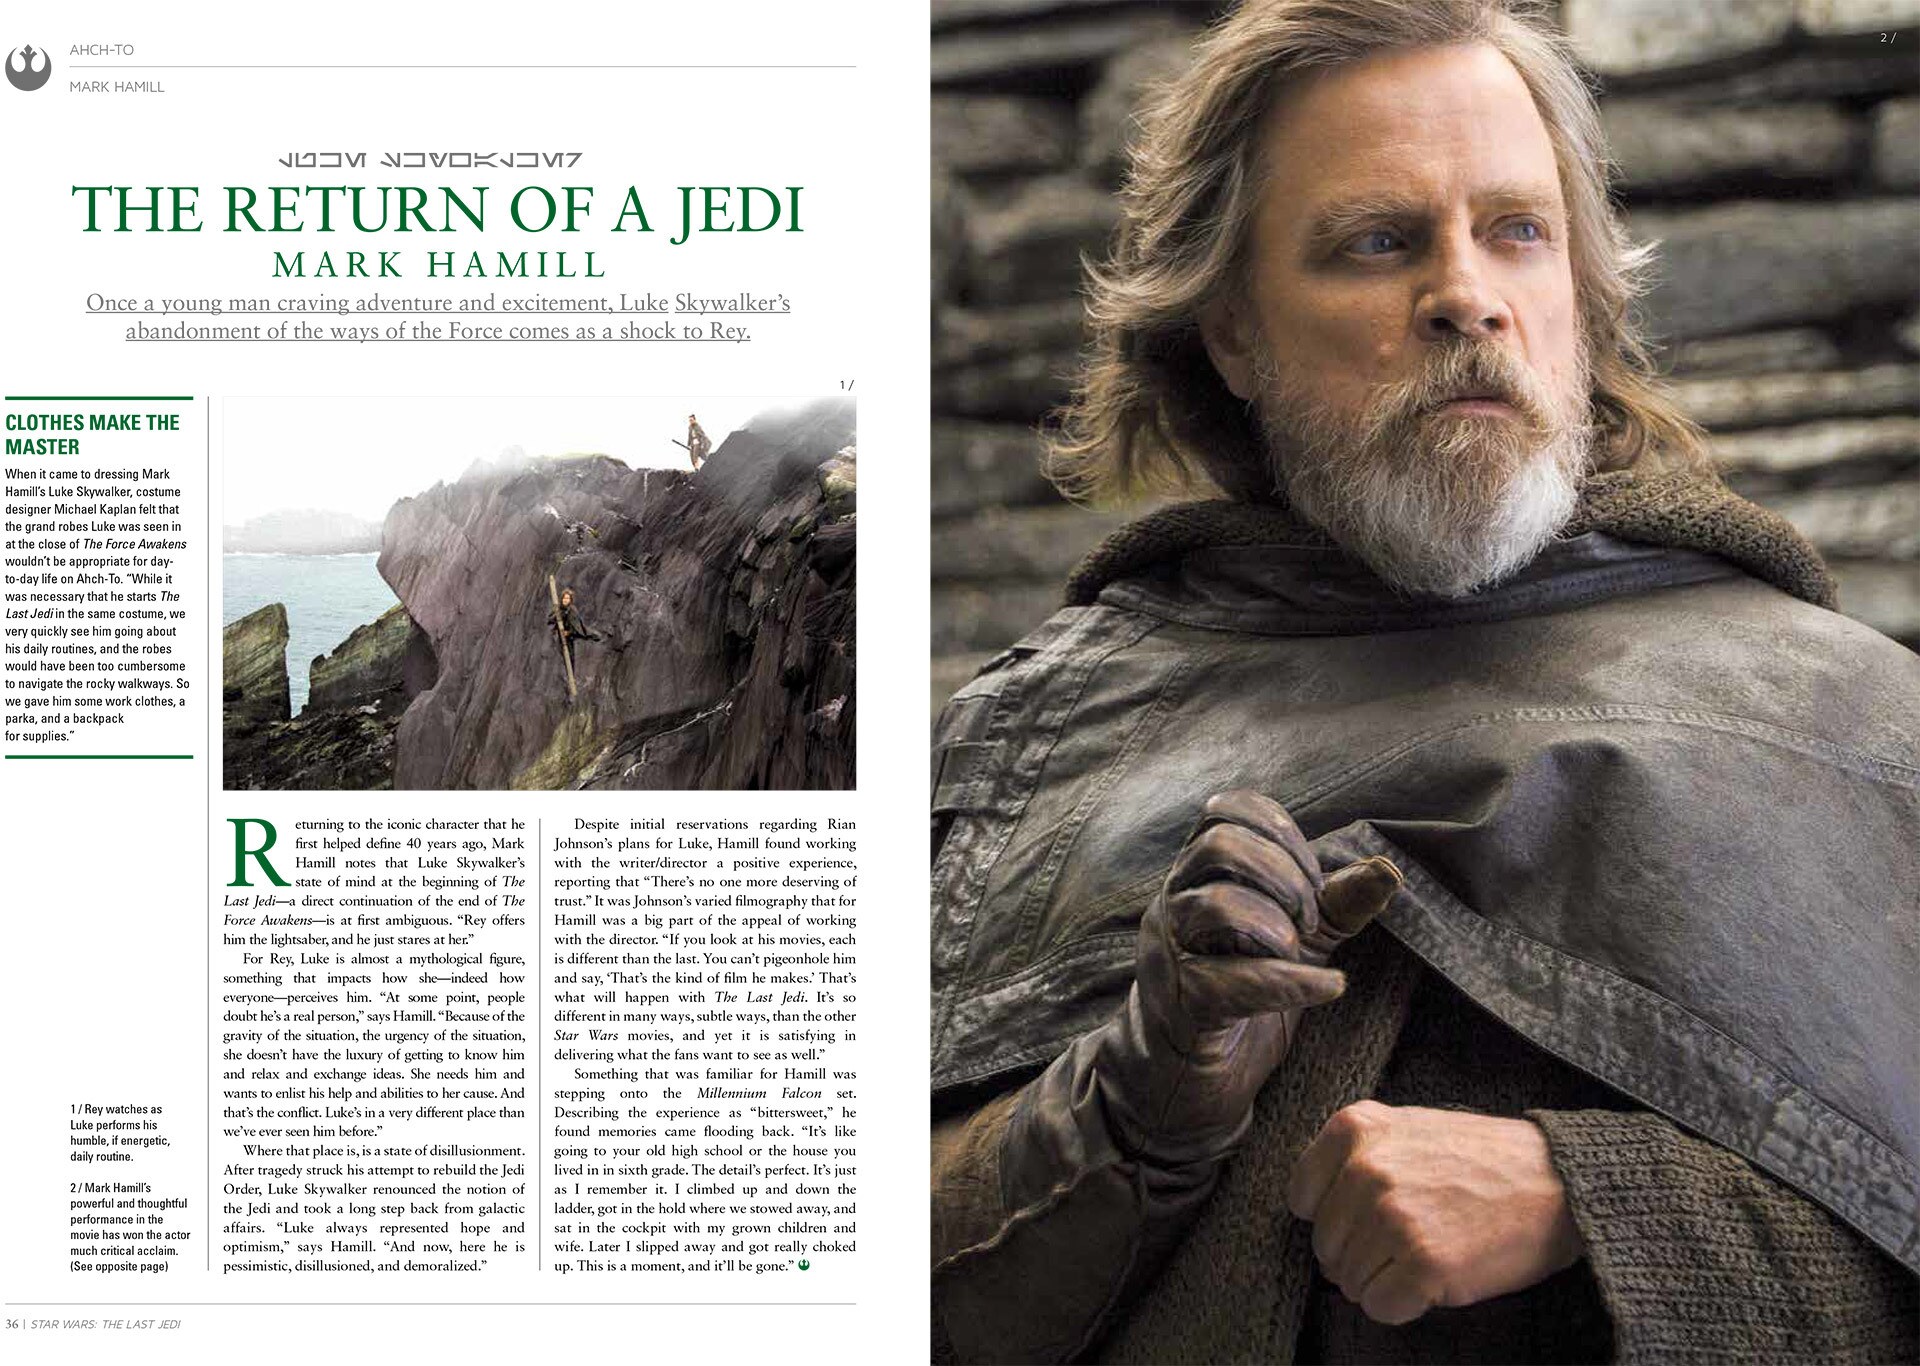 A spread from The Ultimate Guide to Star Wars: The Last Jedi.